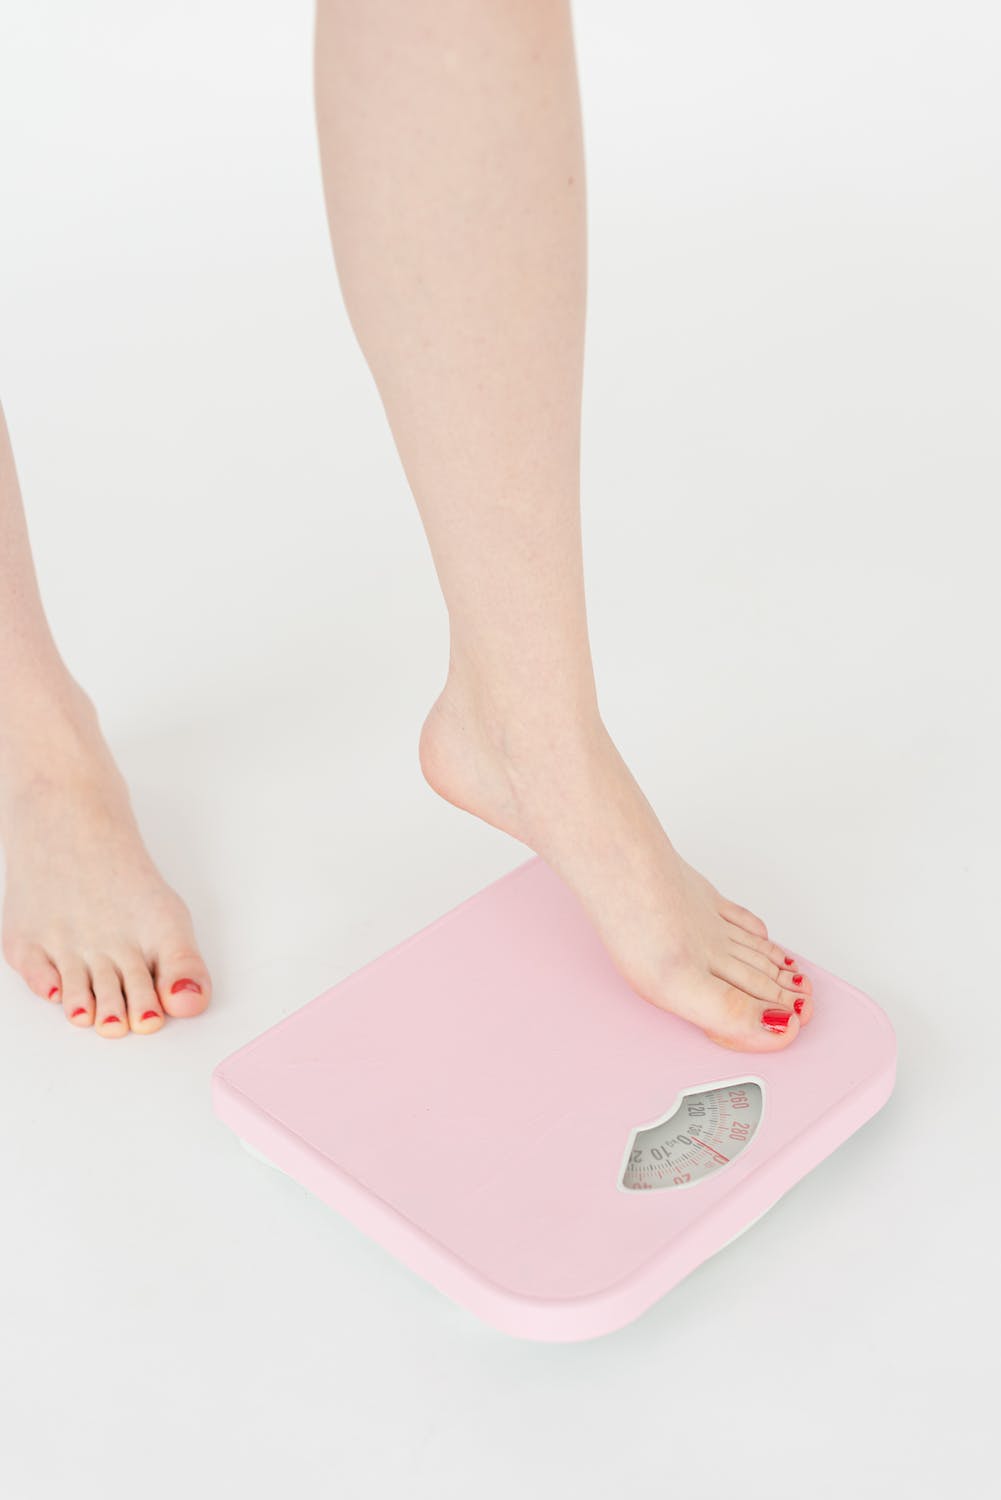 stepping on scale, weight loss, lose fat, fat loss, lose weight